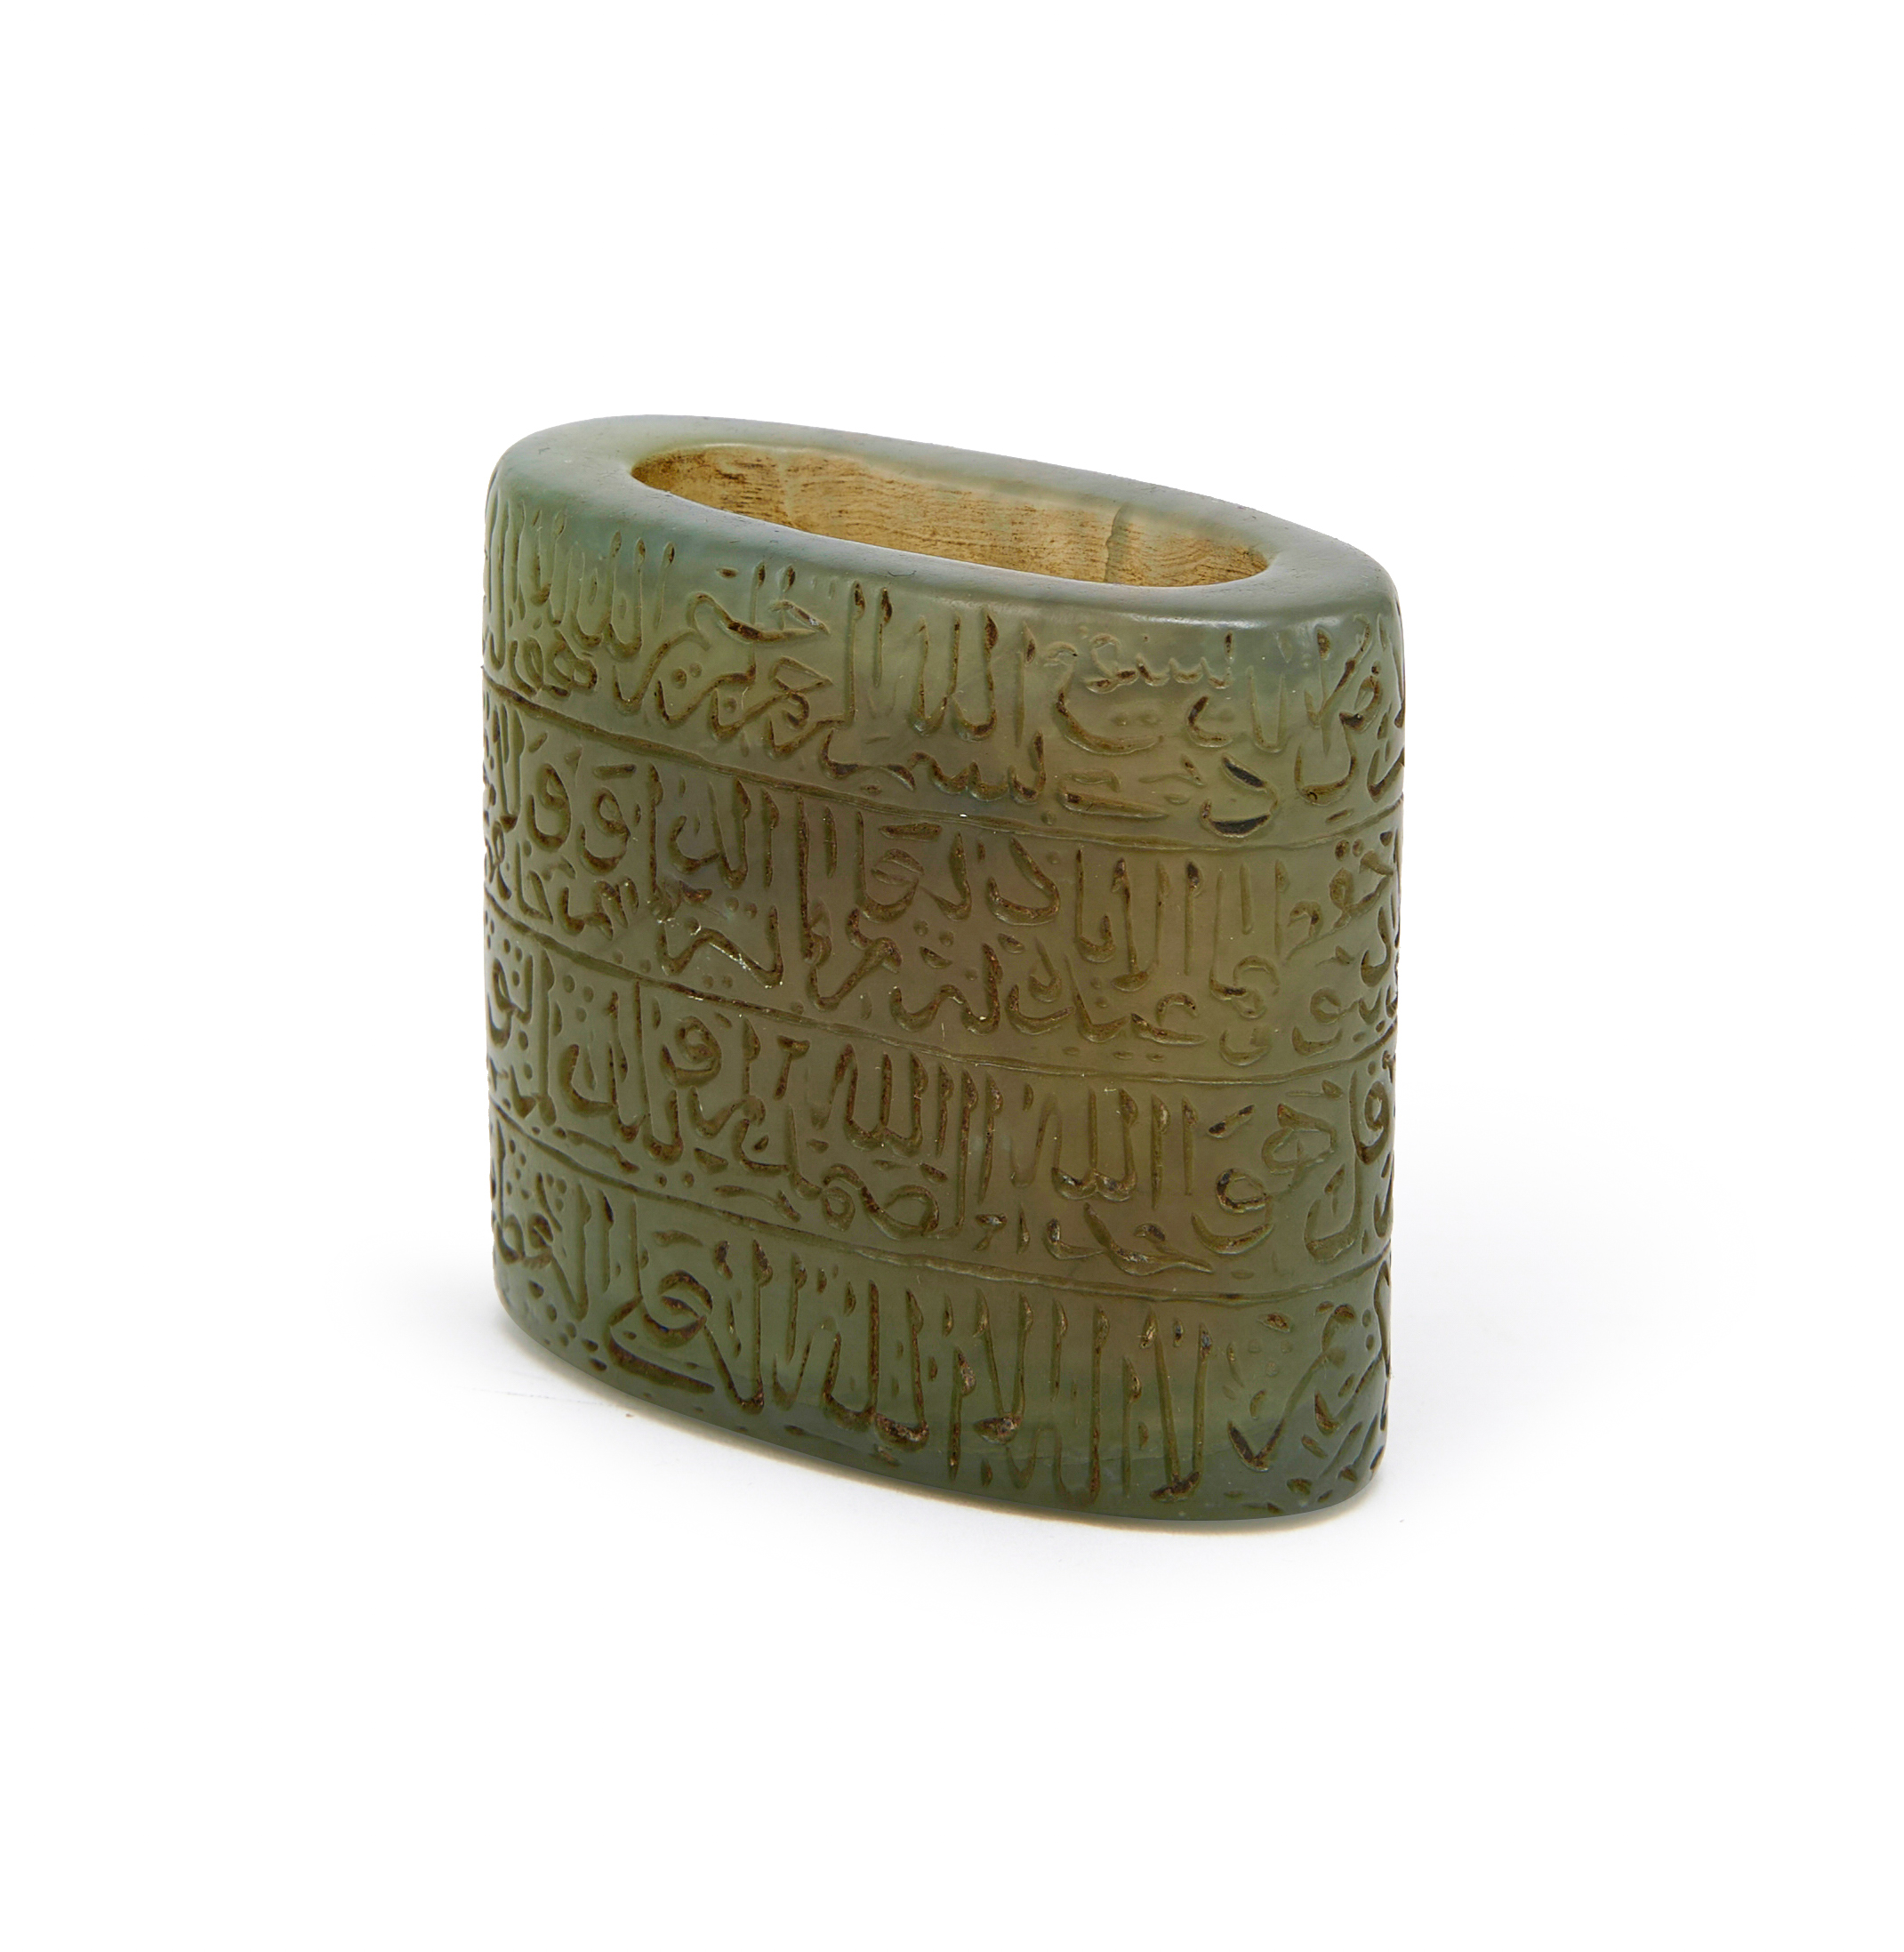 A RARE CALLIGRAPHIC INSCRIBED JADE INKWELL, 18TH CENTURY, MUGHAL, INDIA - Image 5 of 7